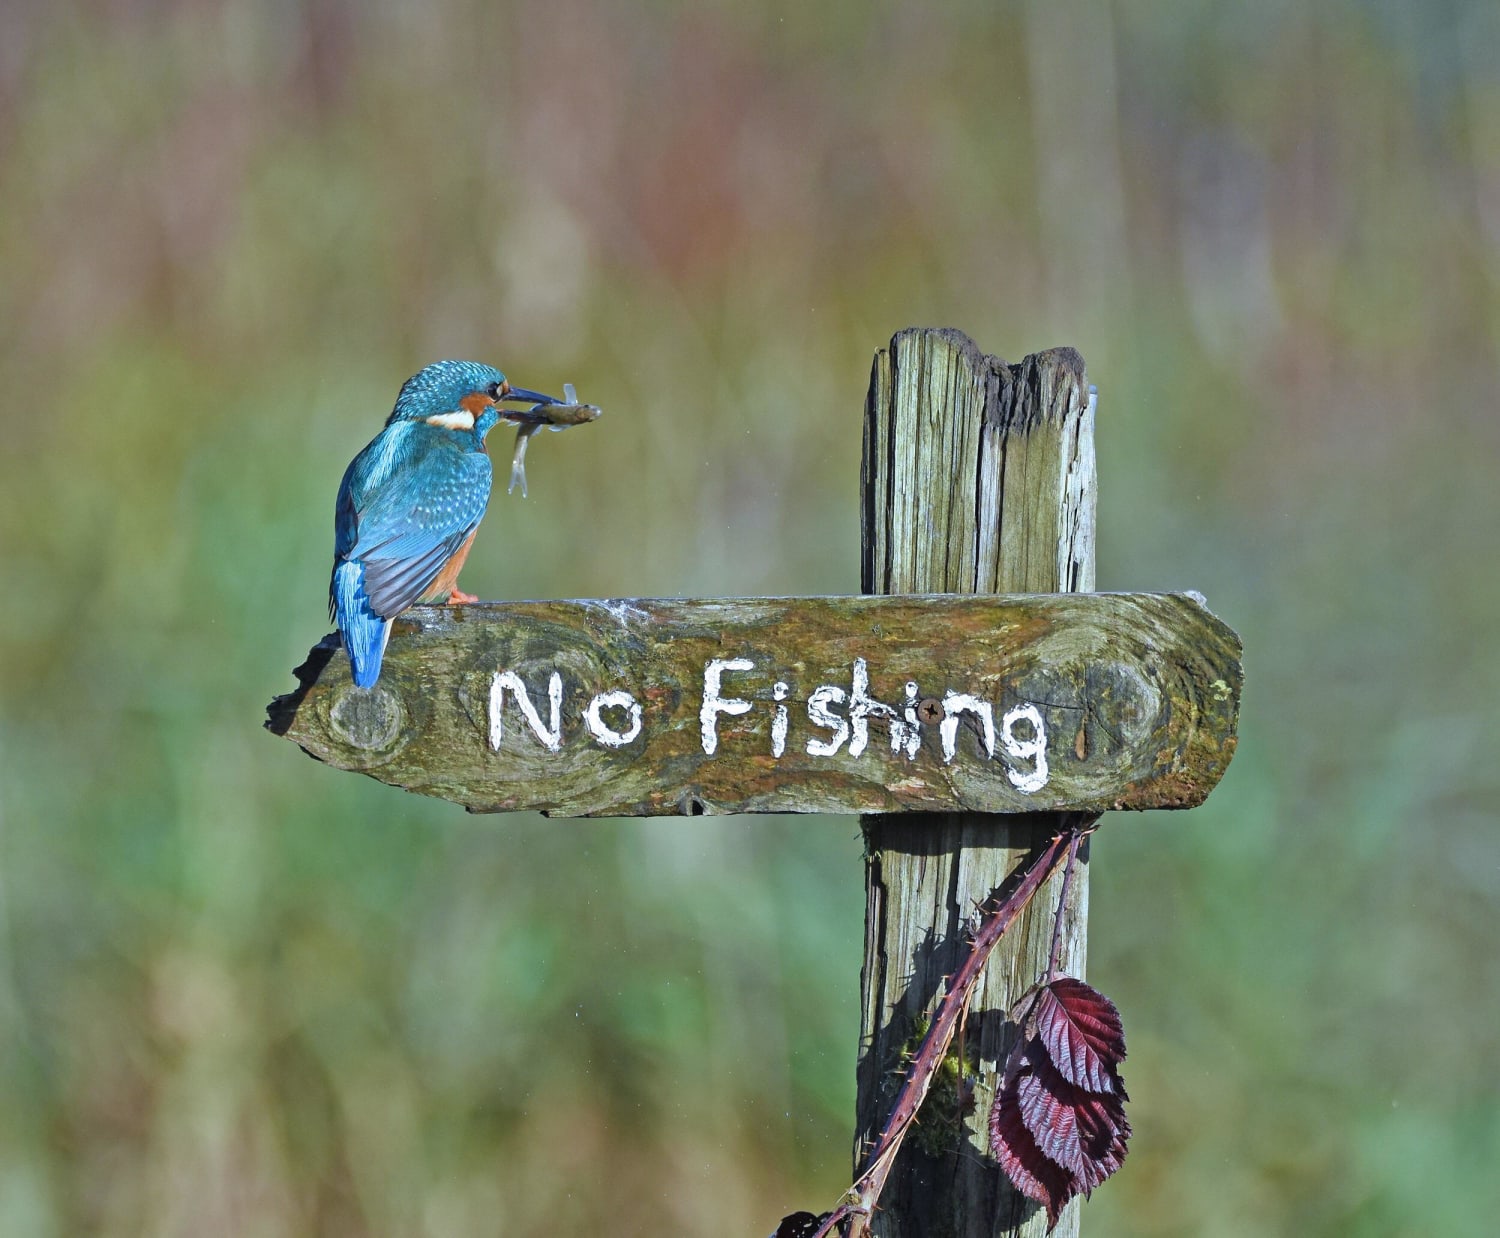 Kingfisher sits on a “no fishing“ sign in Kirkcudbright, UK